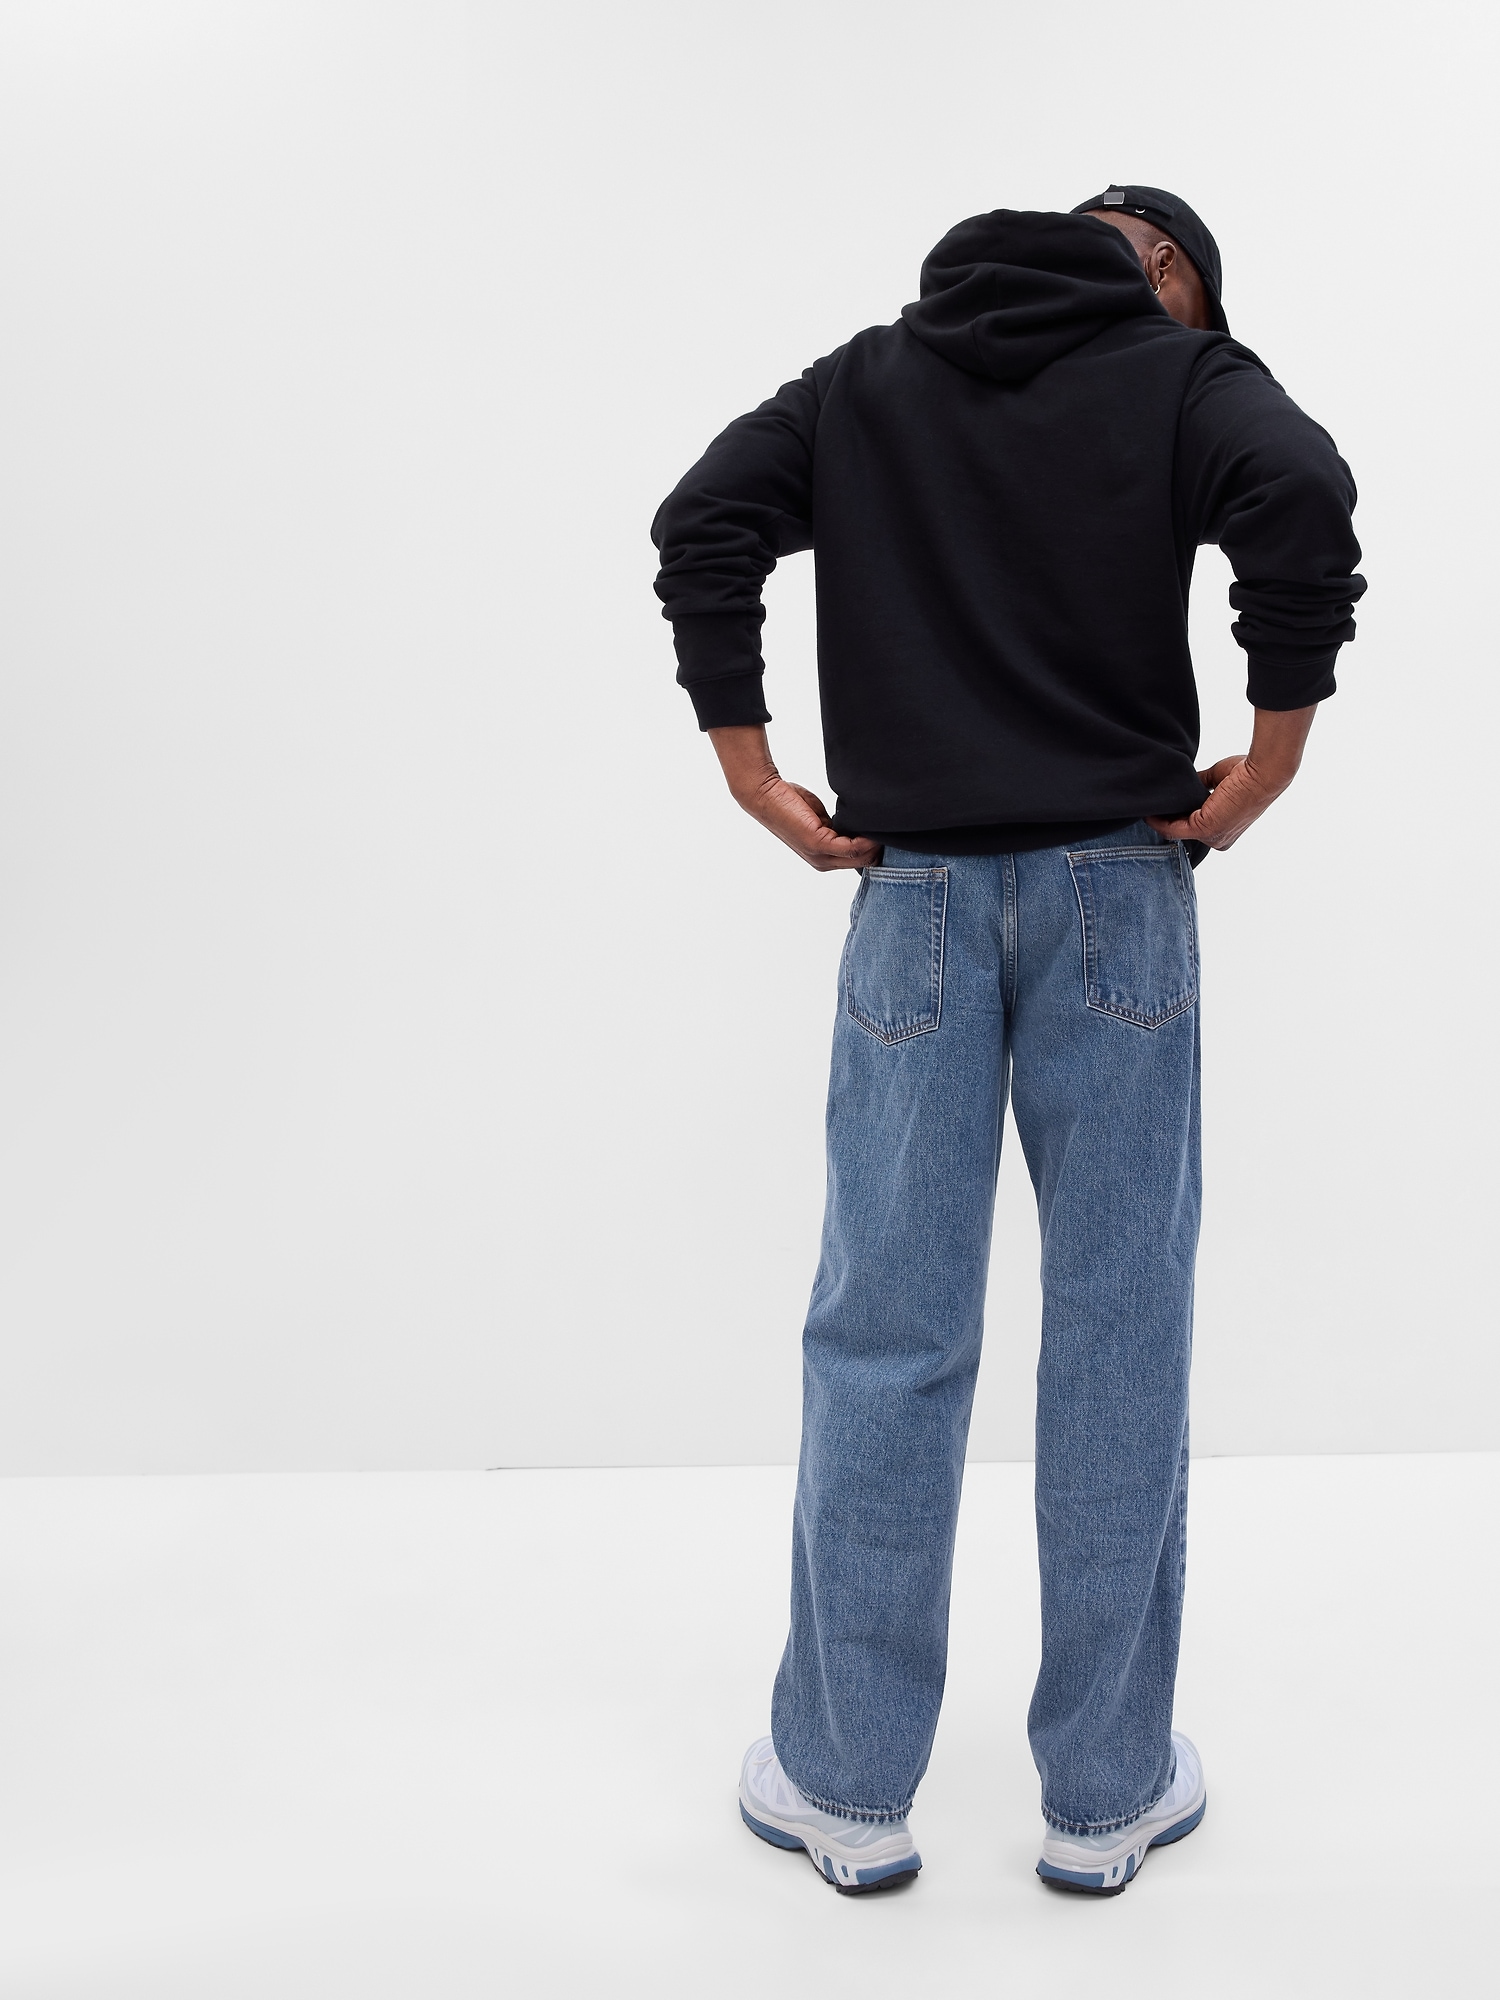 Gap UK on X: Sustainable denim — made with Washwell techniques